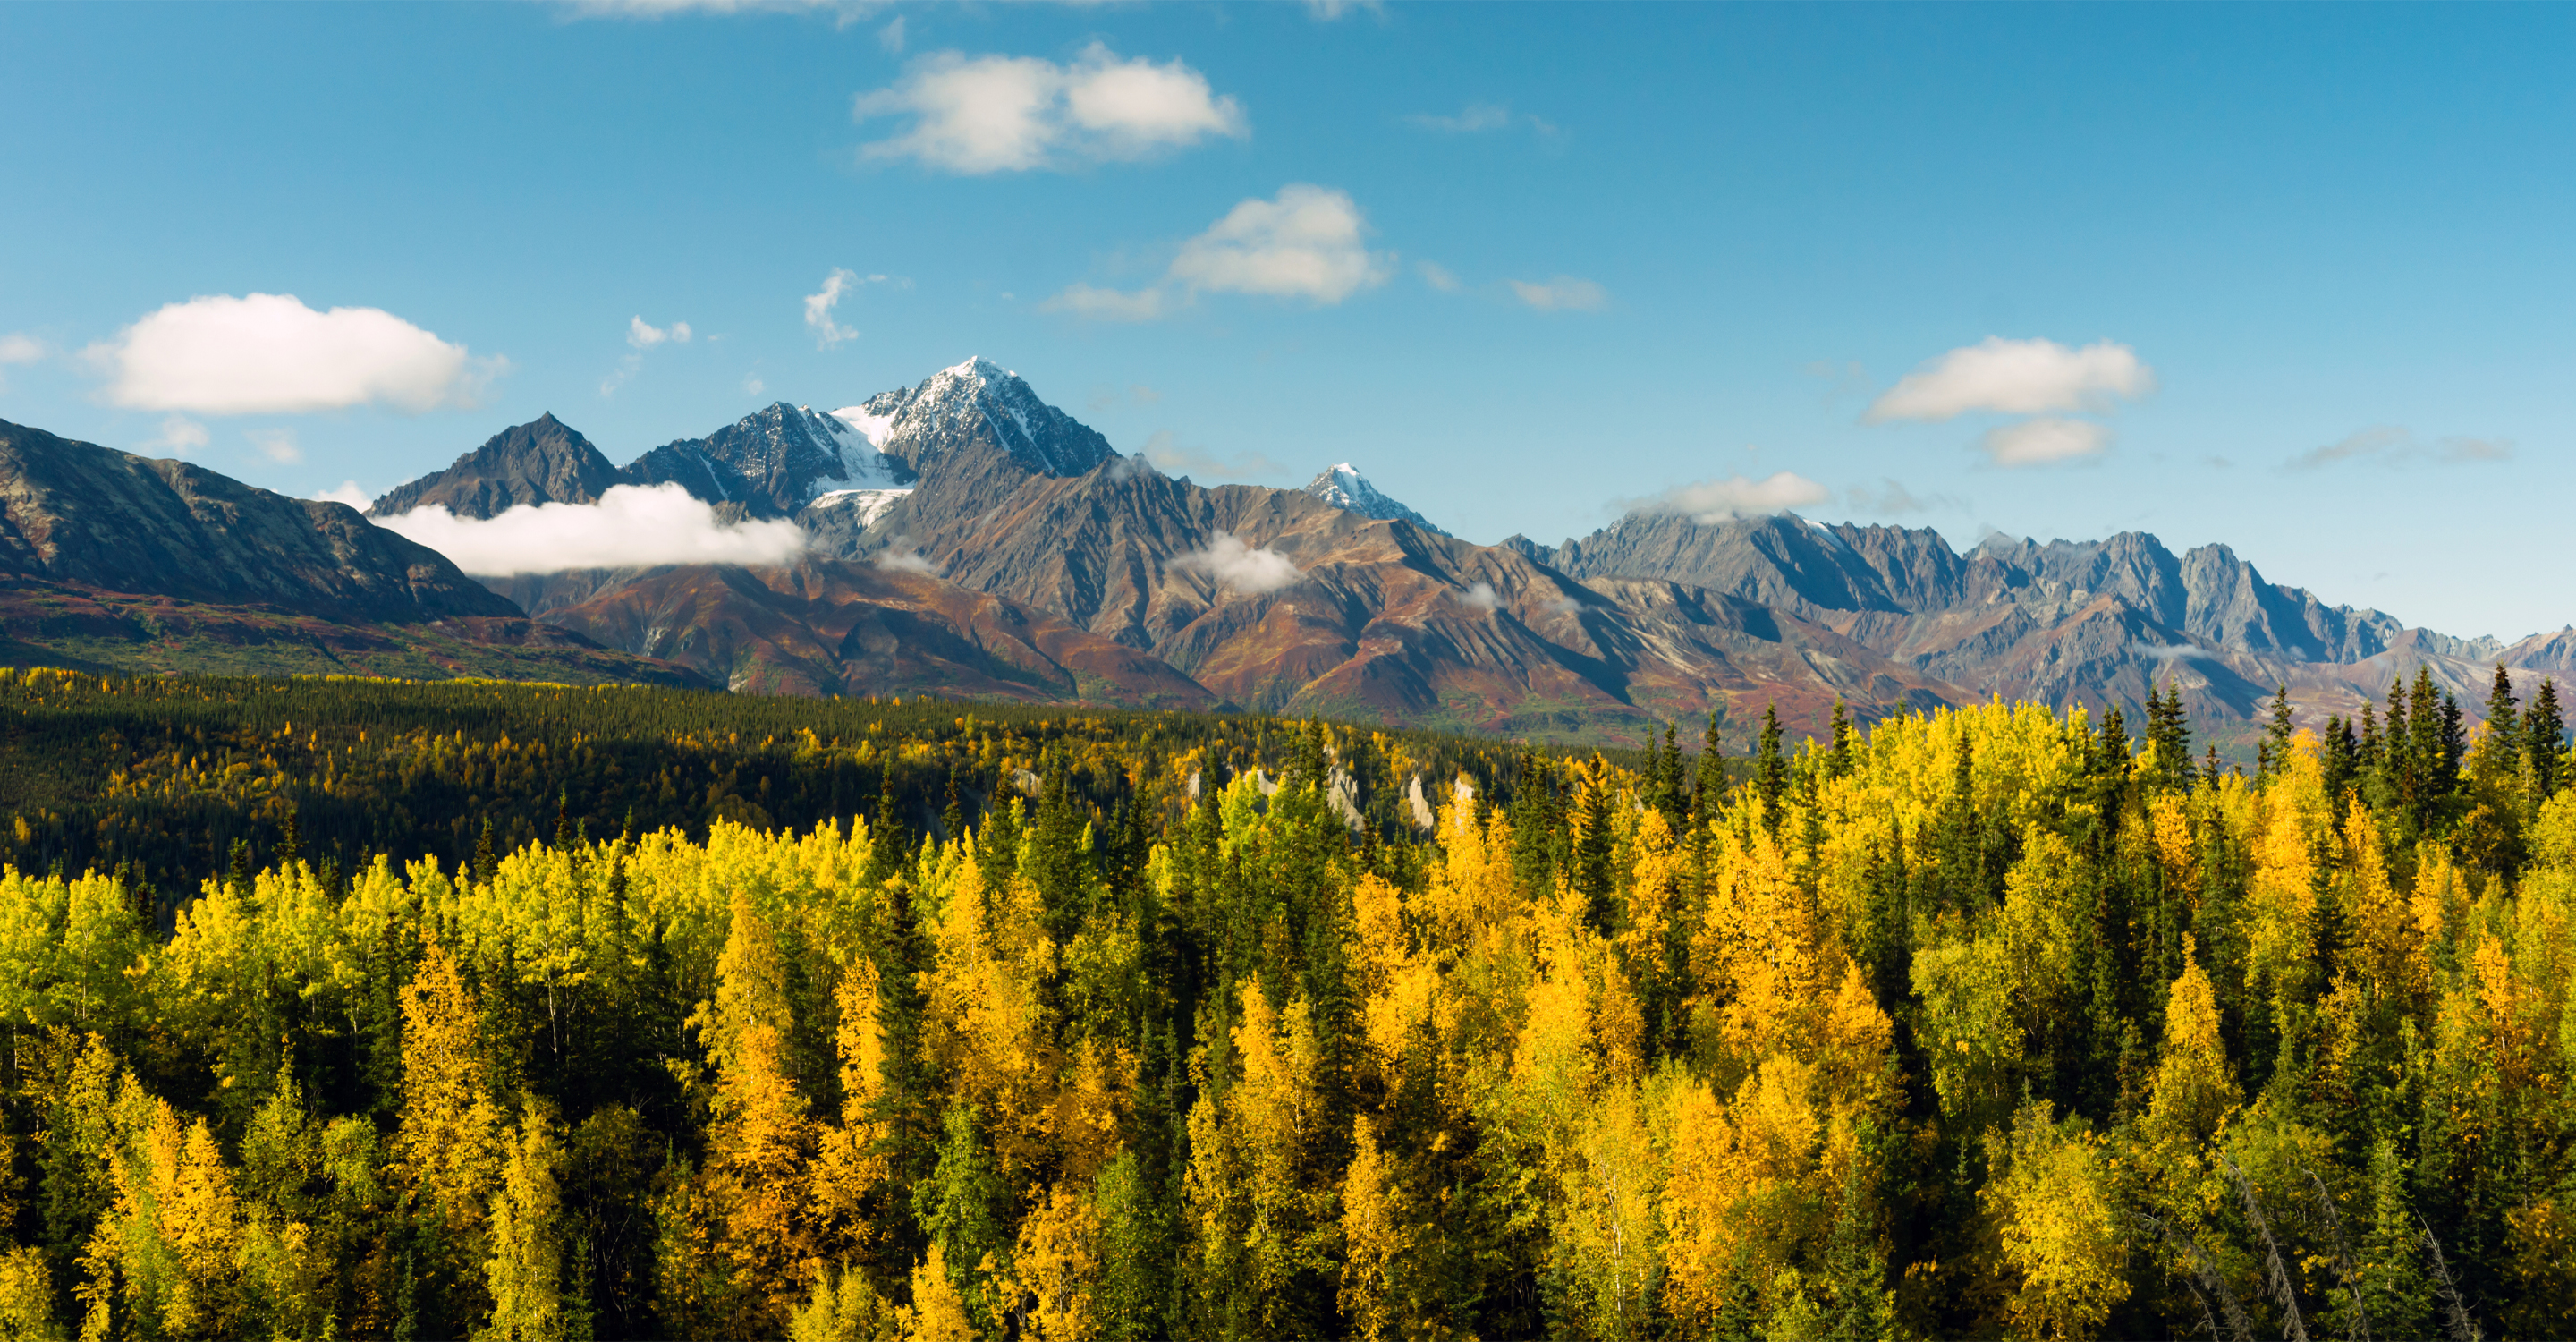 Autumn colors of the forest in front of the mountain range of the Kenai Peninsula, Alaska, USA